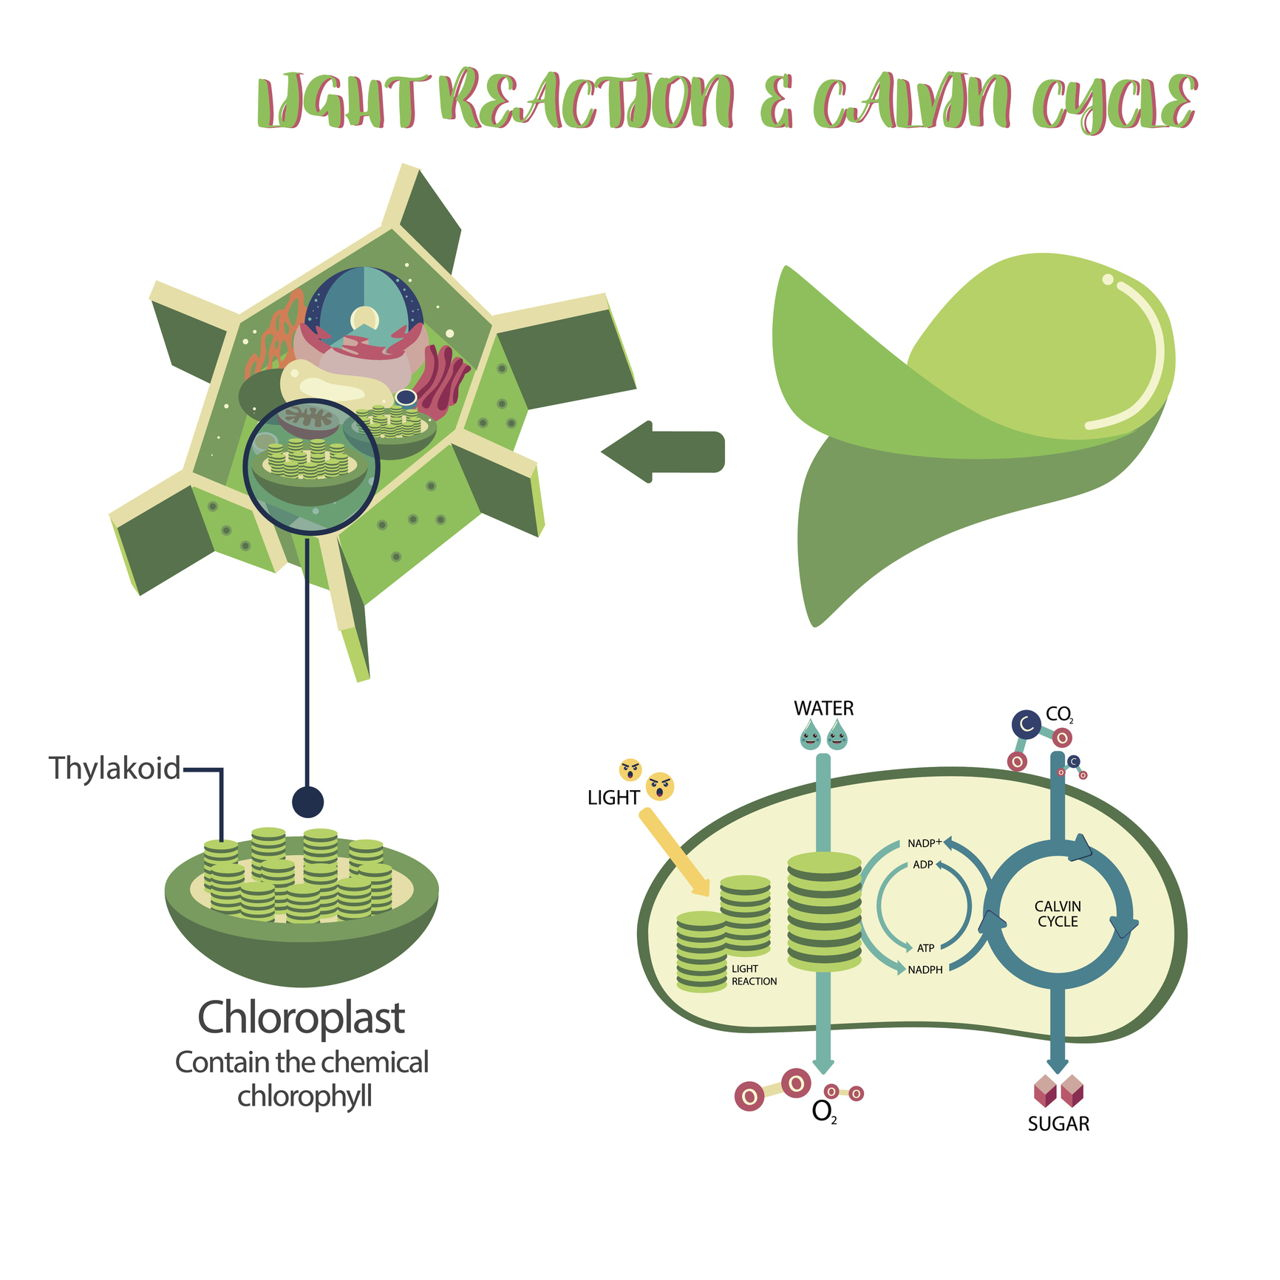 Calvin Cycle Diagram All You Need To Know About Photosynthesis And Cellular Respiration